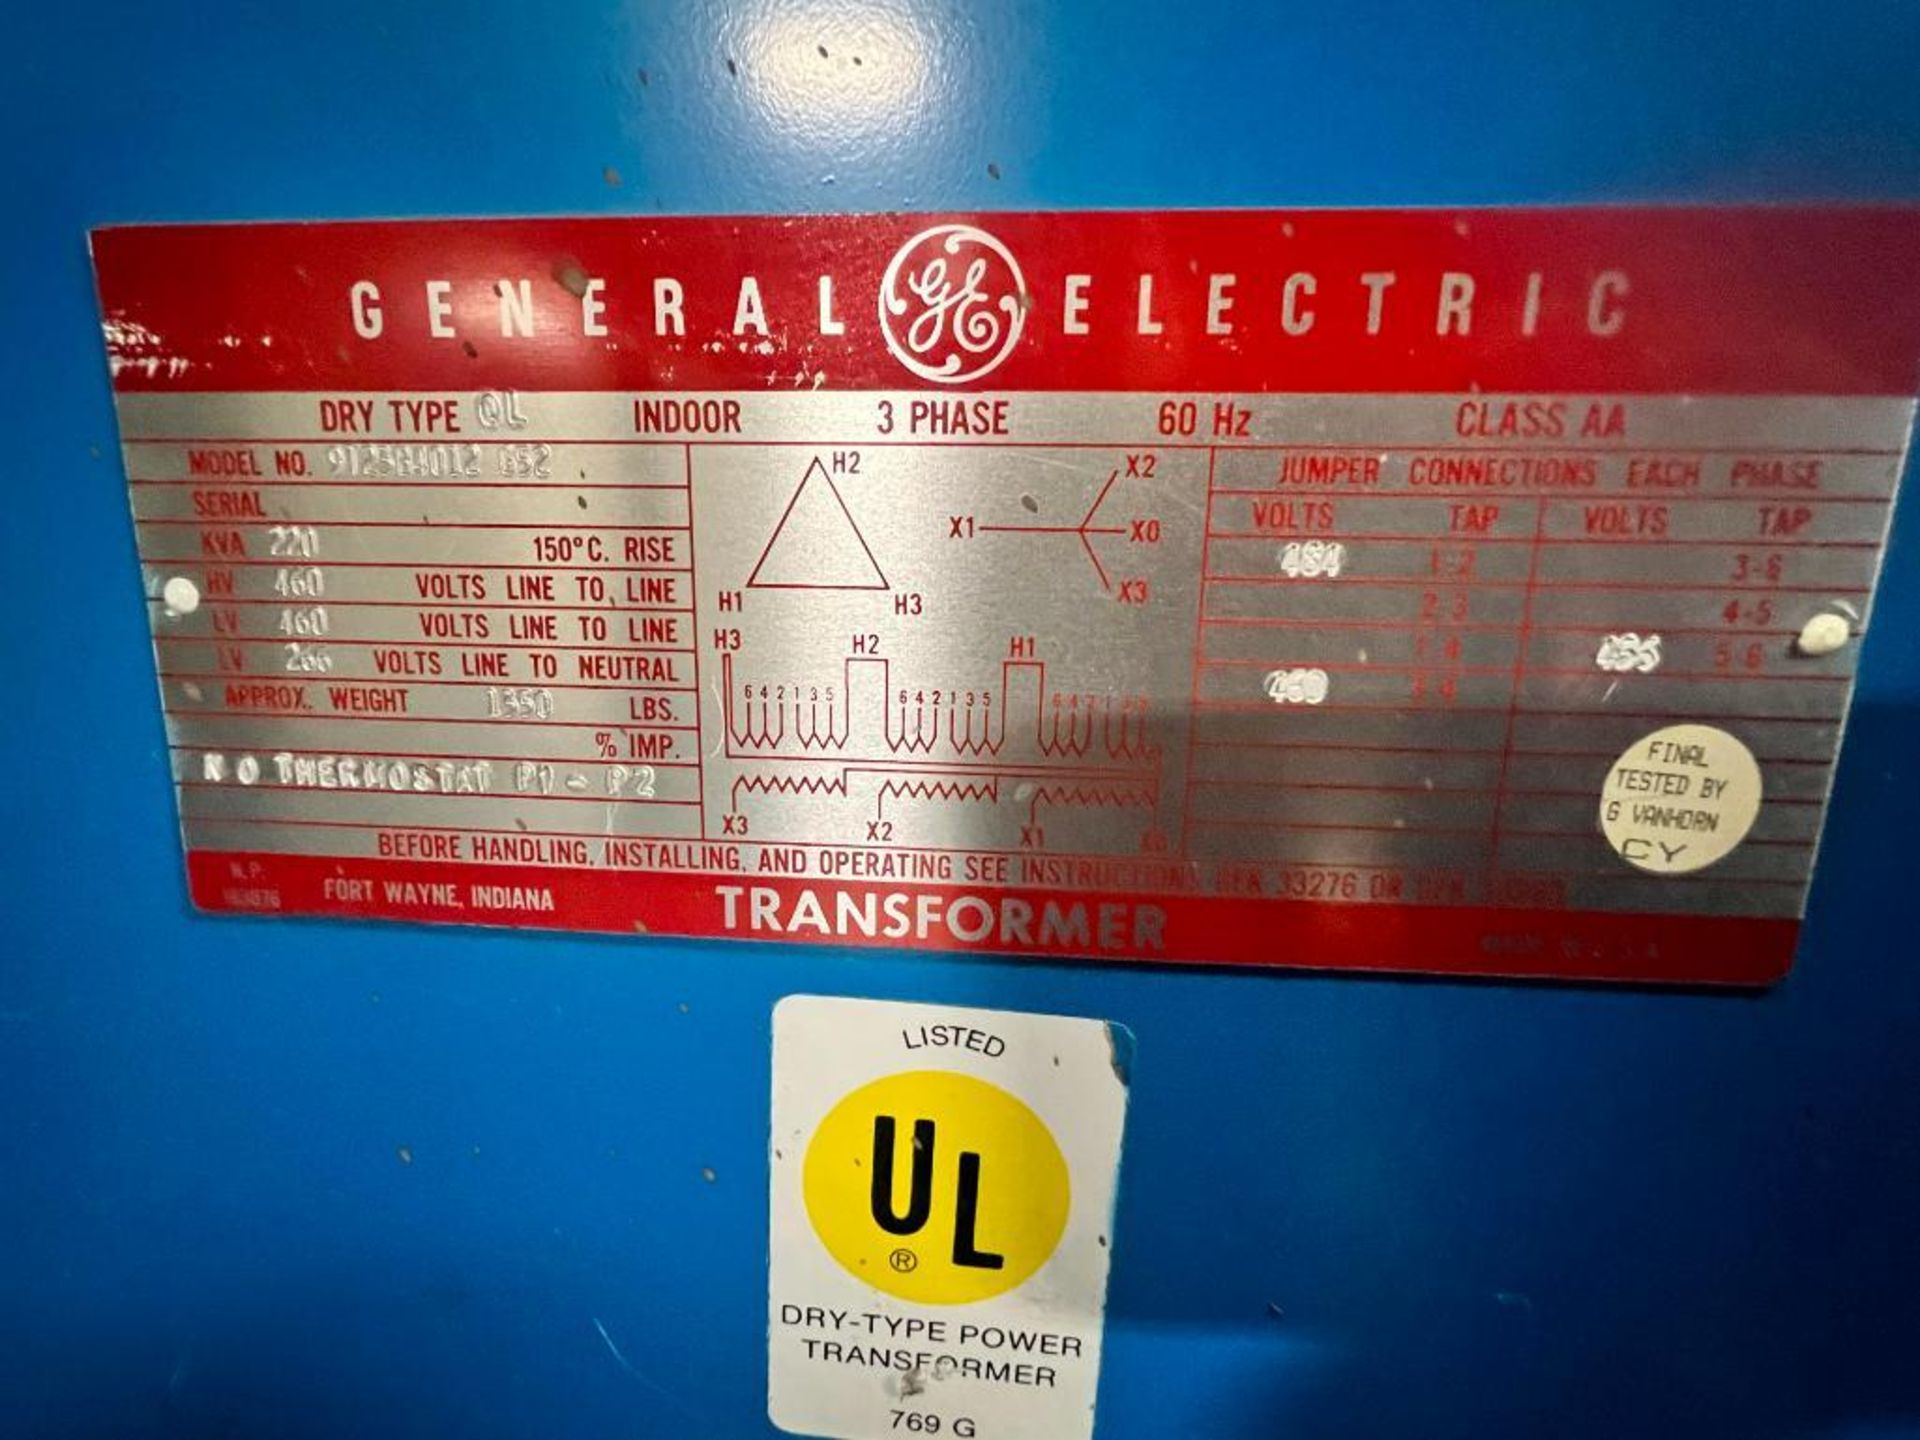 General Electric Transformer, Model 9T23B4012 G52, Dry Type: QL, 220 KVA, 3-Phase, 480 Volt - Image 2 of 2